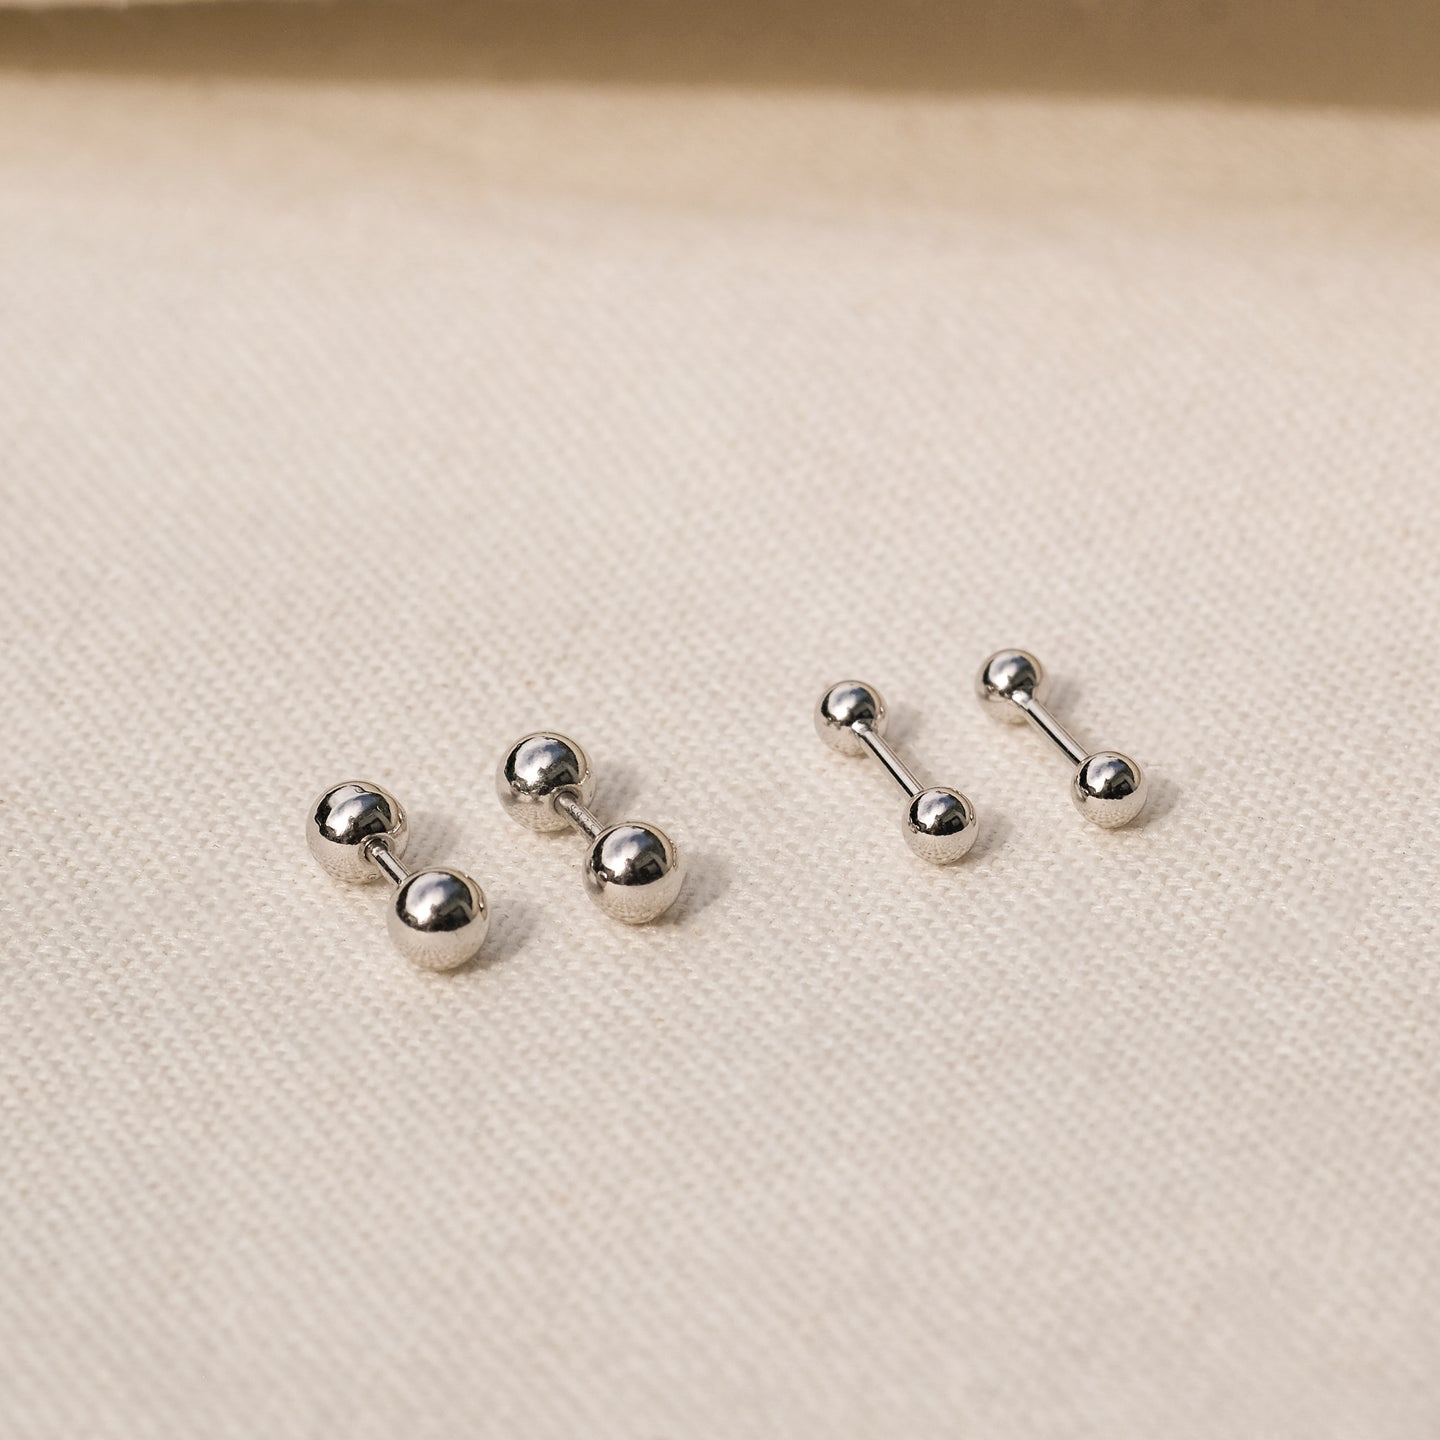 products/hola-teeny-tiny-stud-earrings-925-sterling-silver-2.jpg